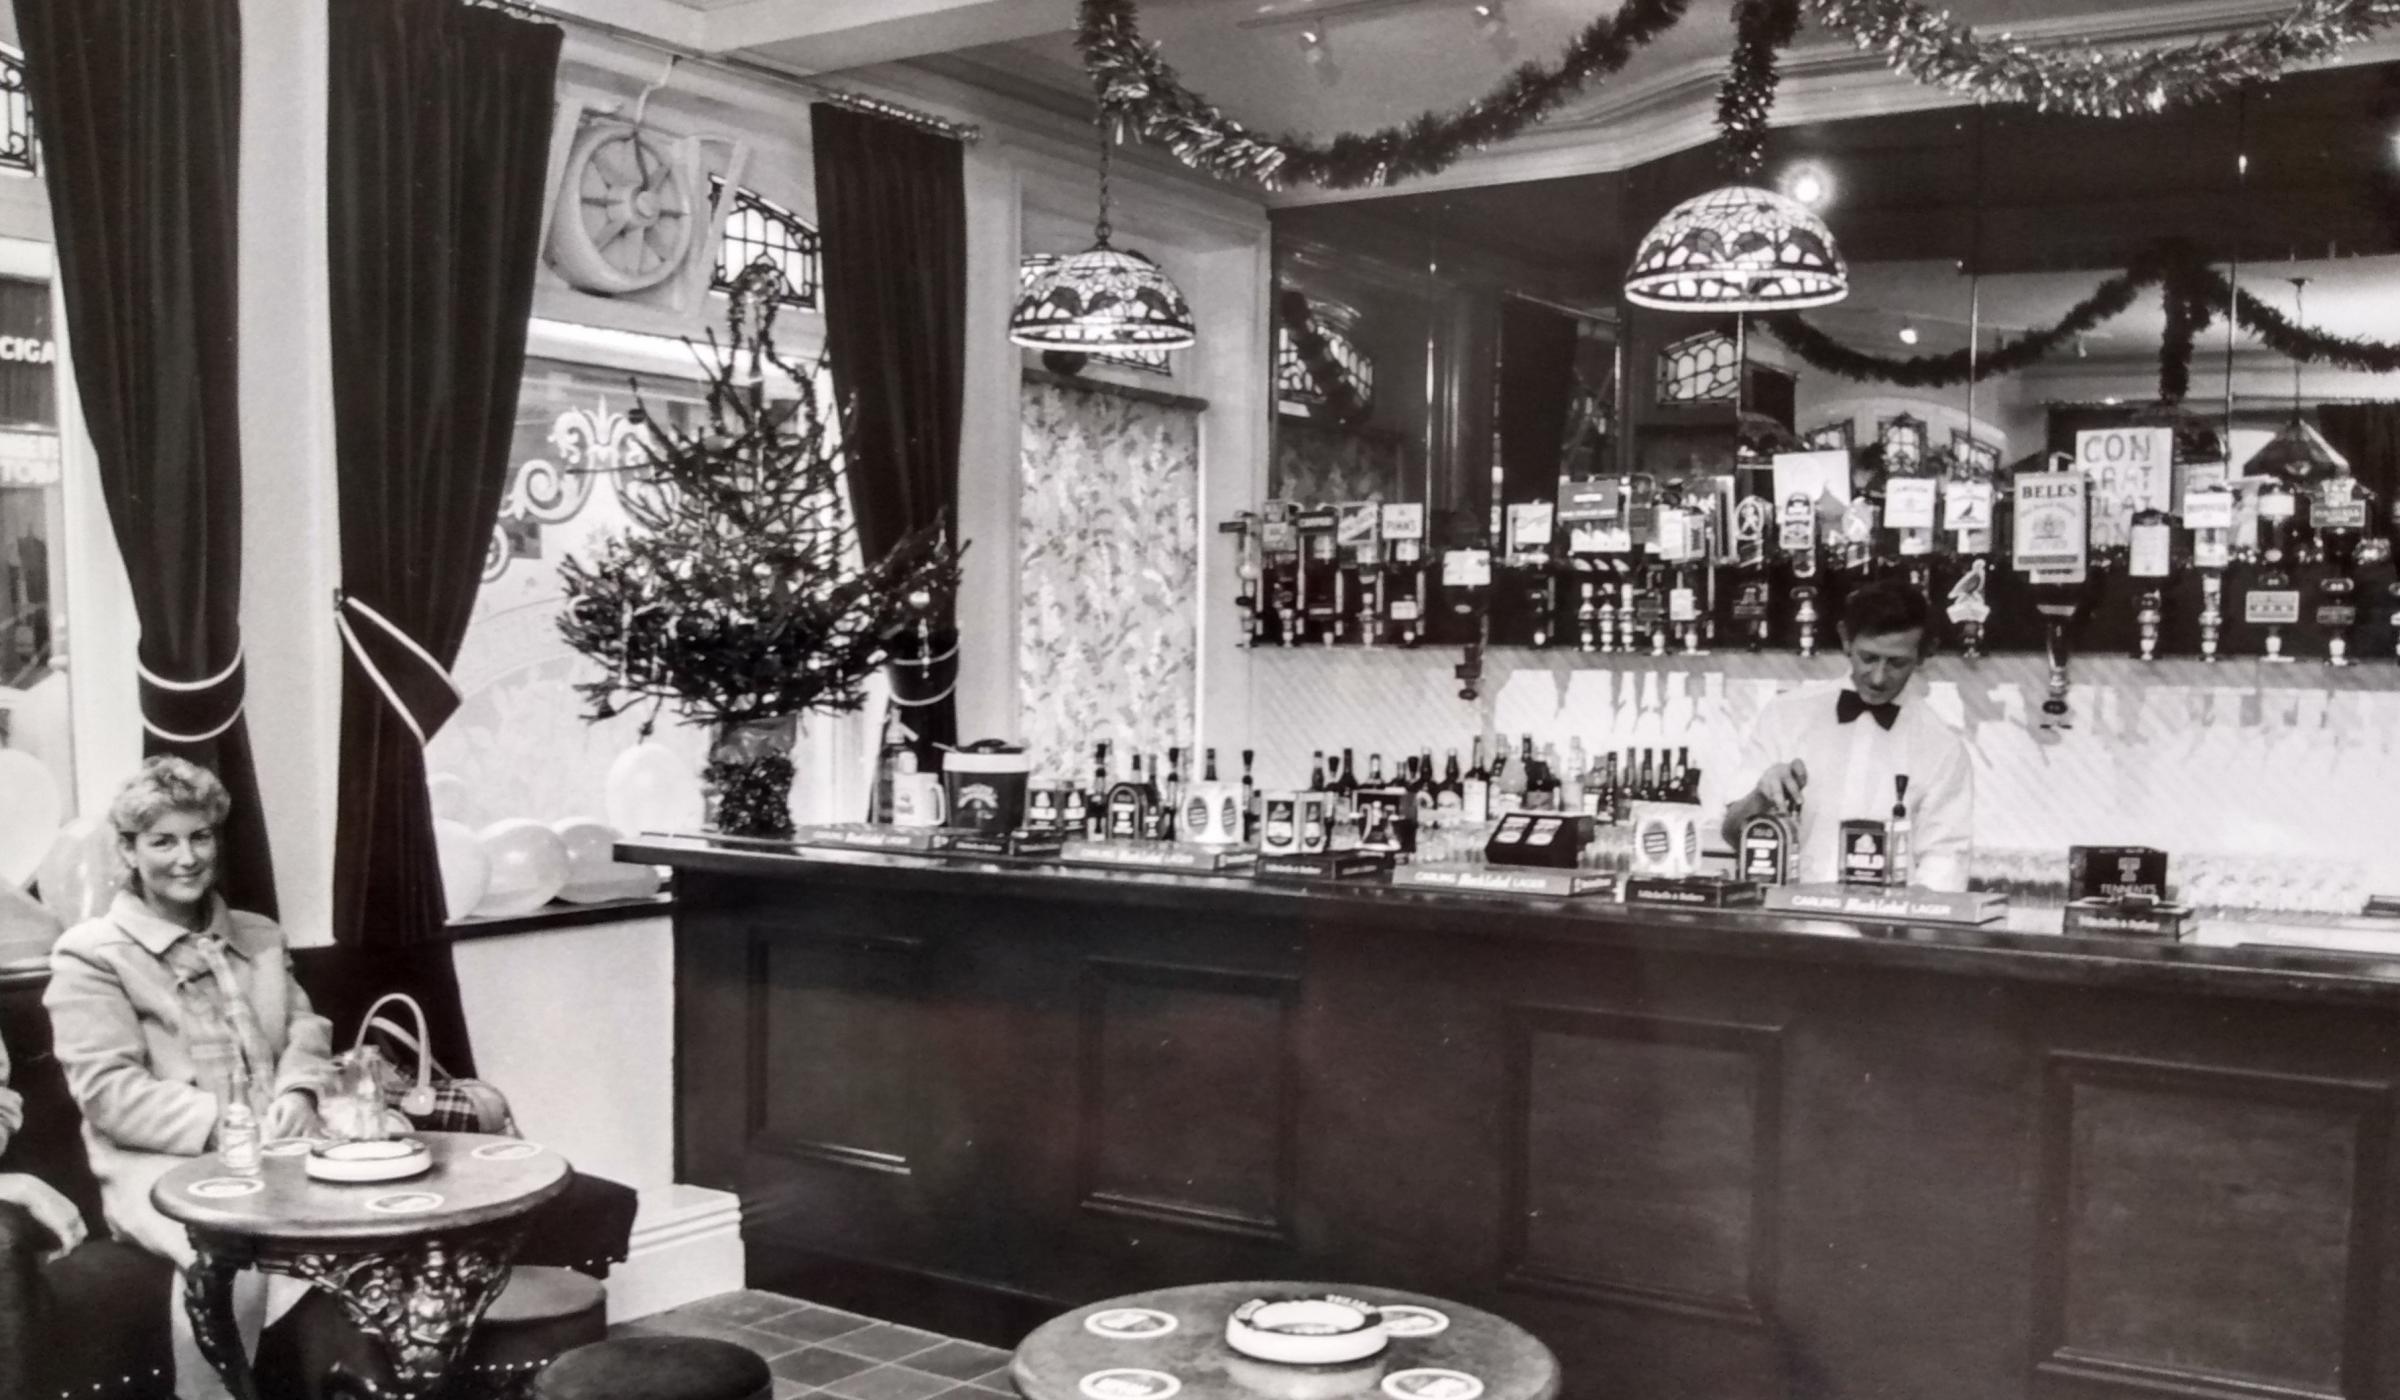 December 1987 and The Royal Exchange has had a makeover, and was now known as Oliver’s Bar